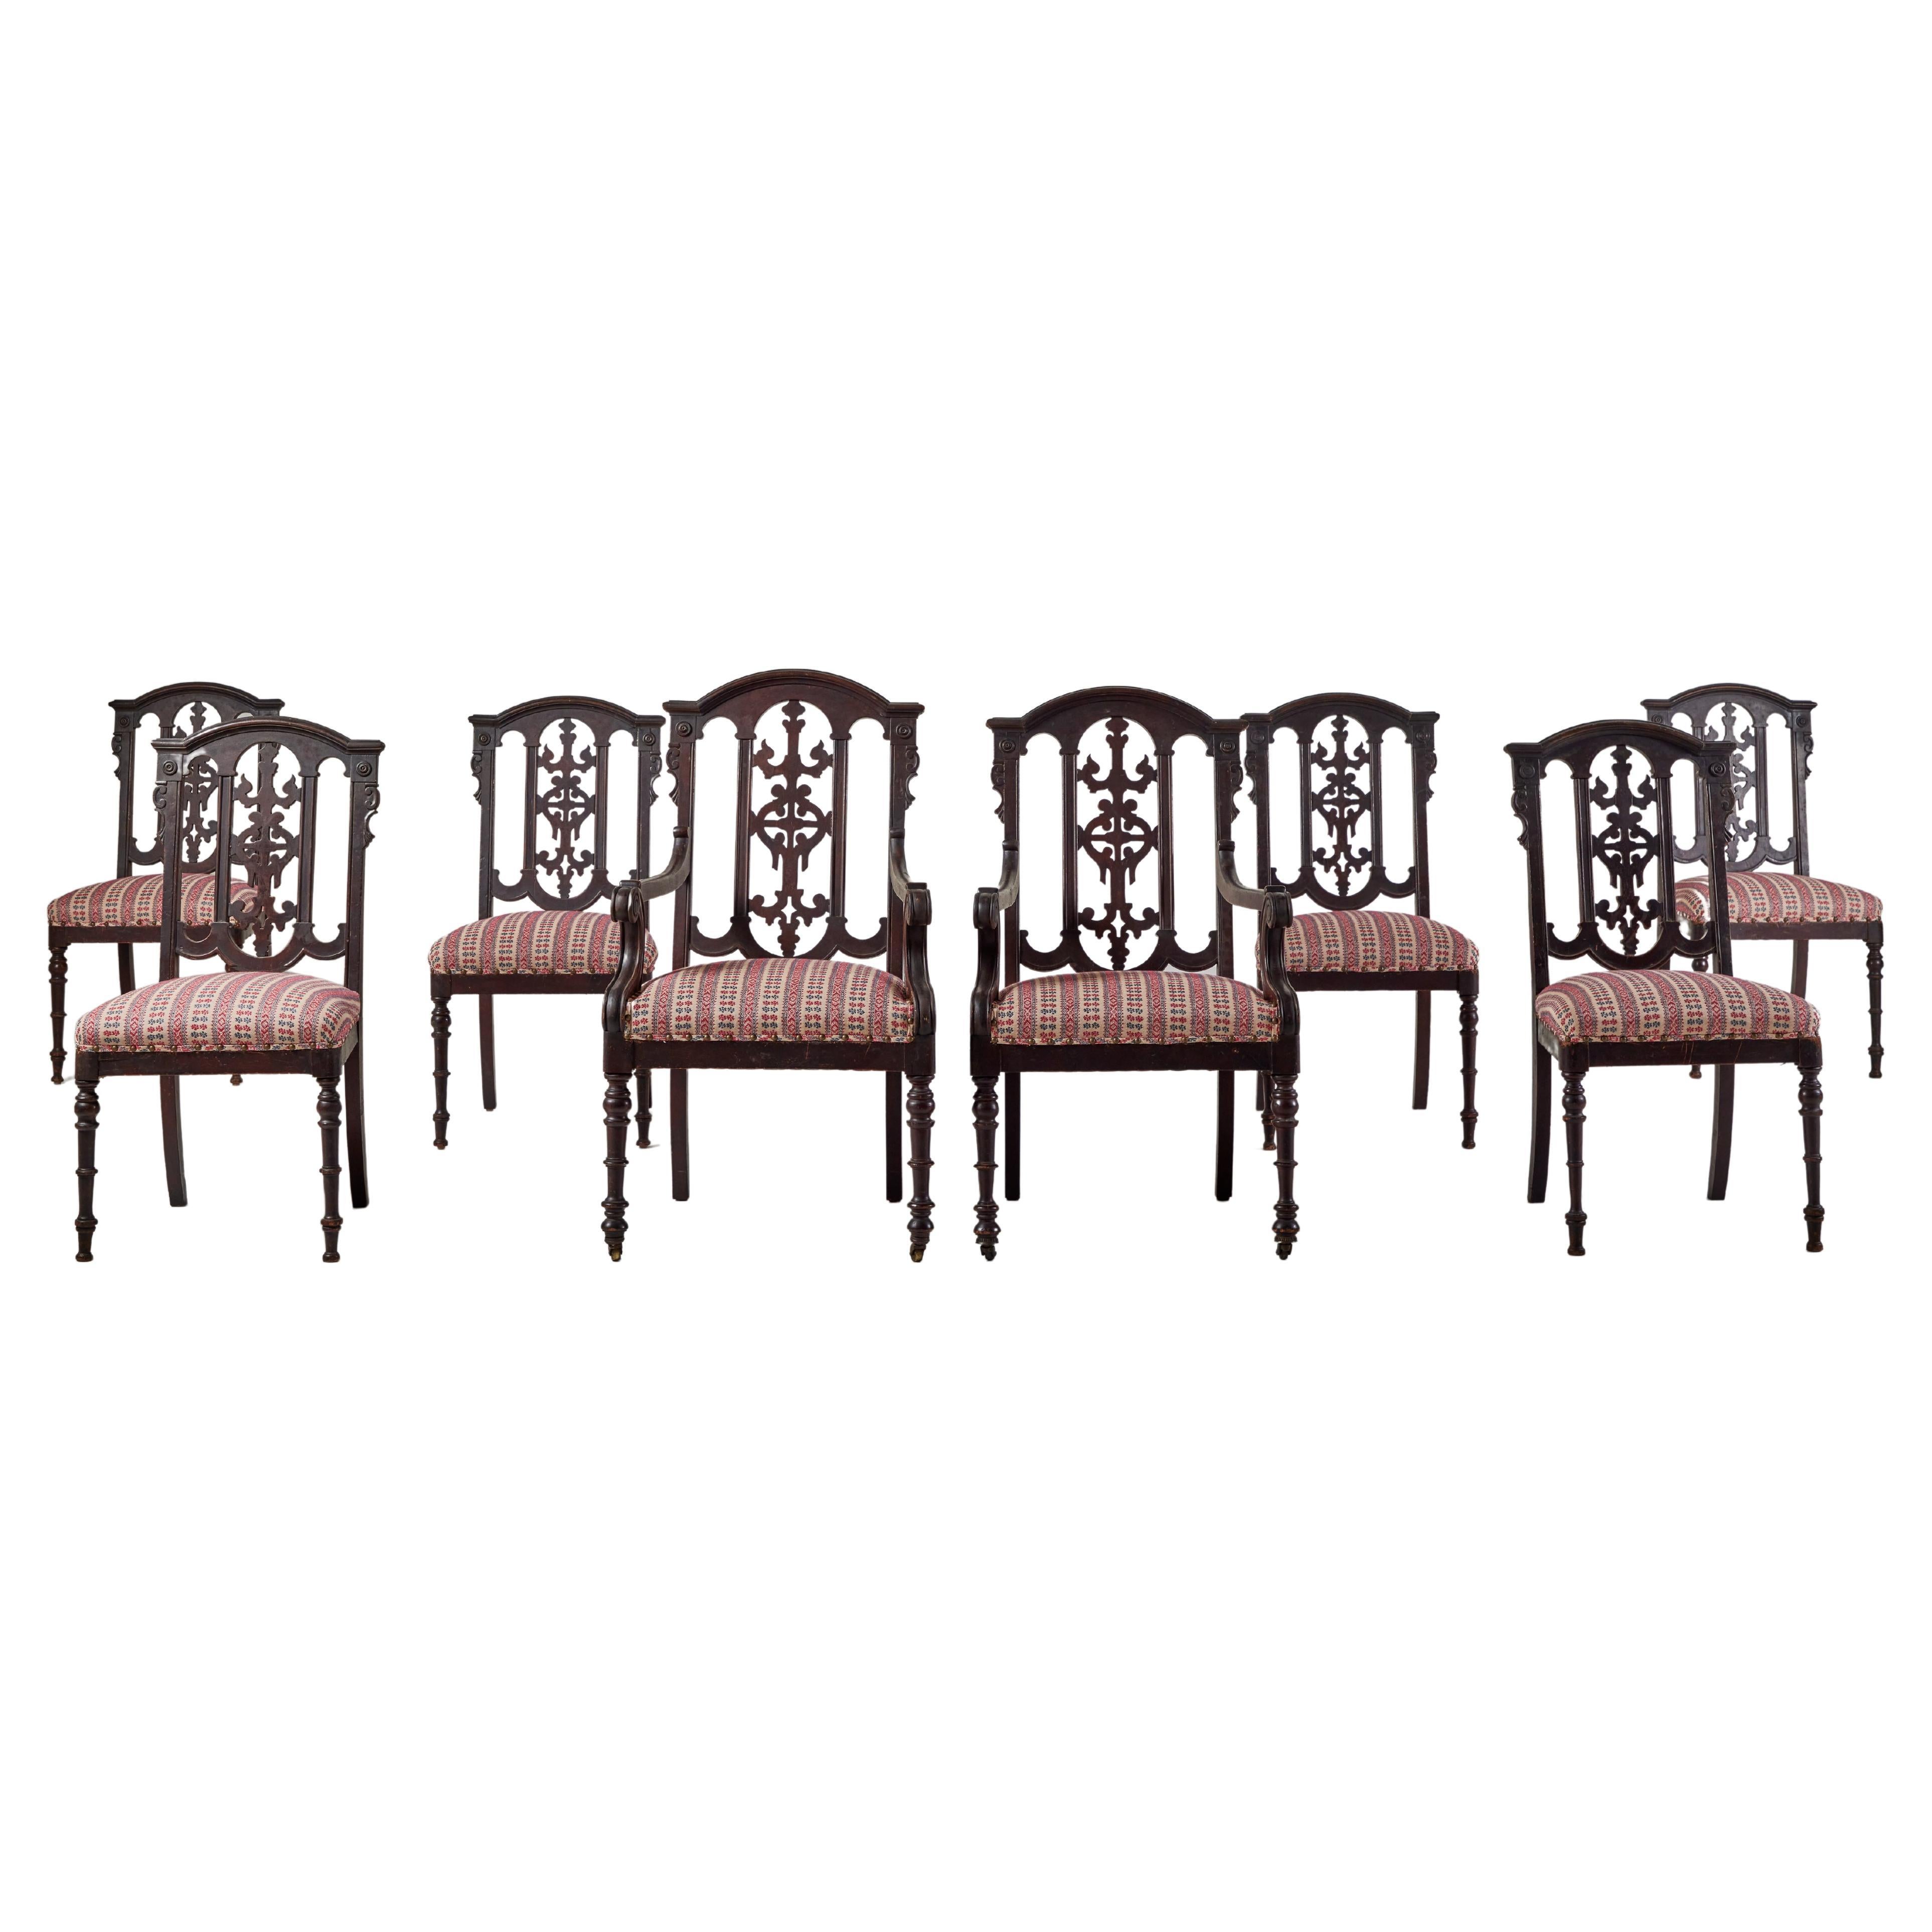 Set of Spanish Revival Dining Chairs